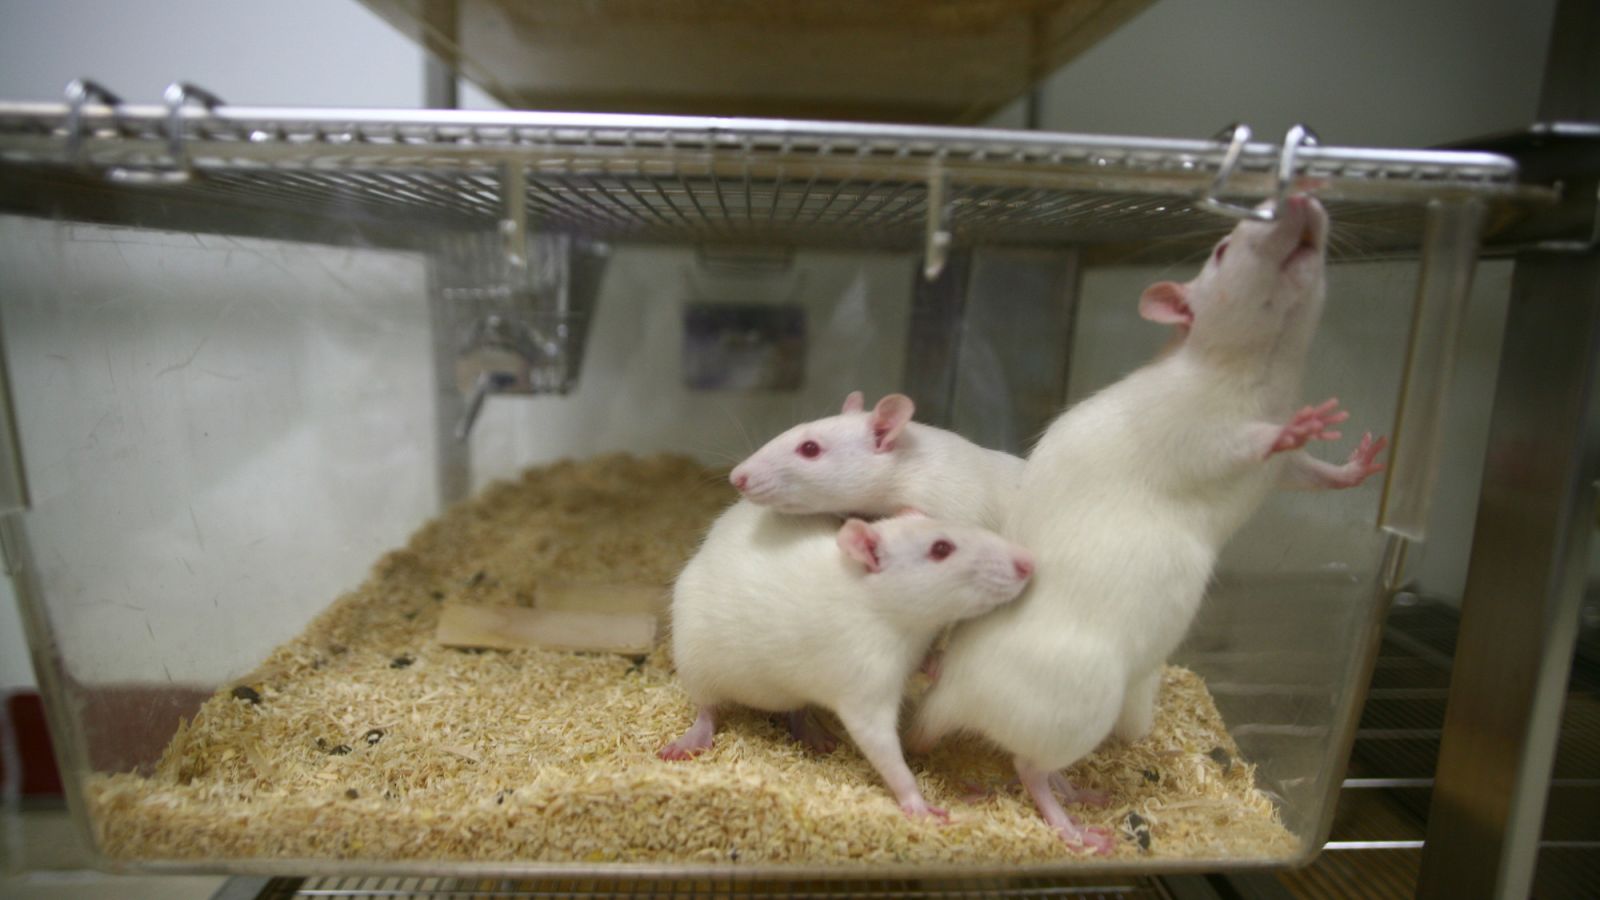 Spinal cord damage bridged in rats